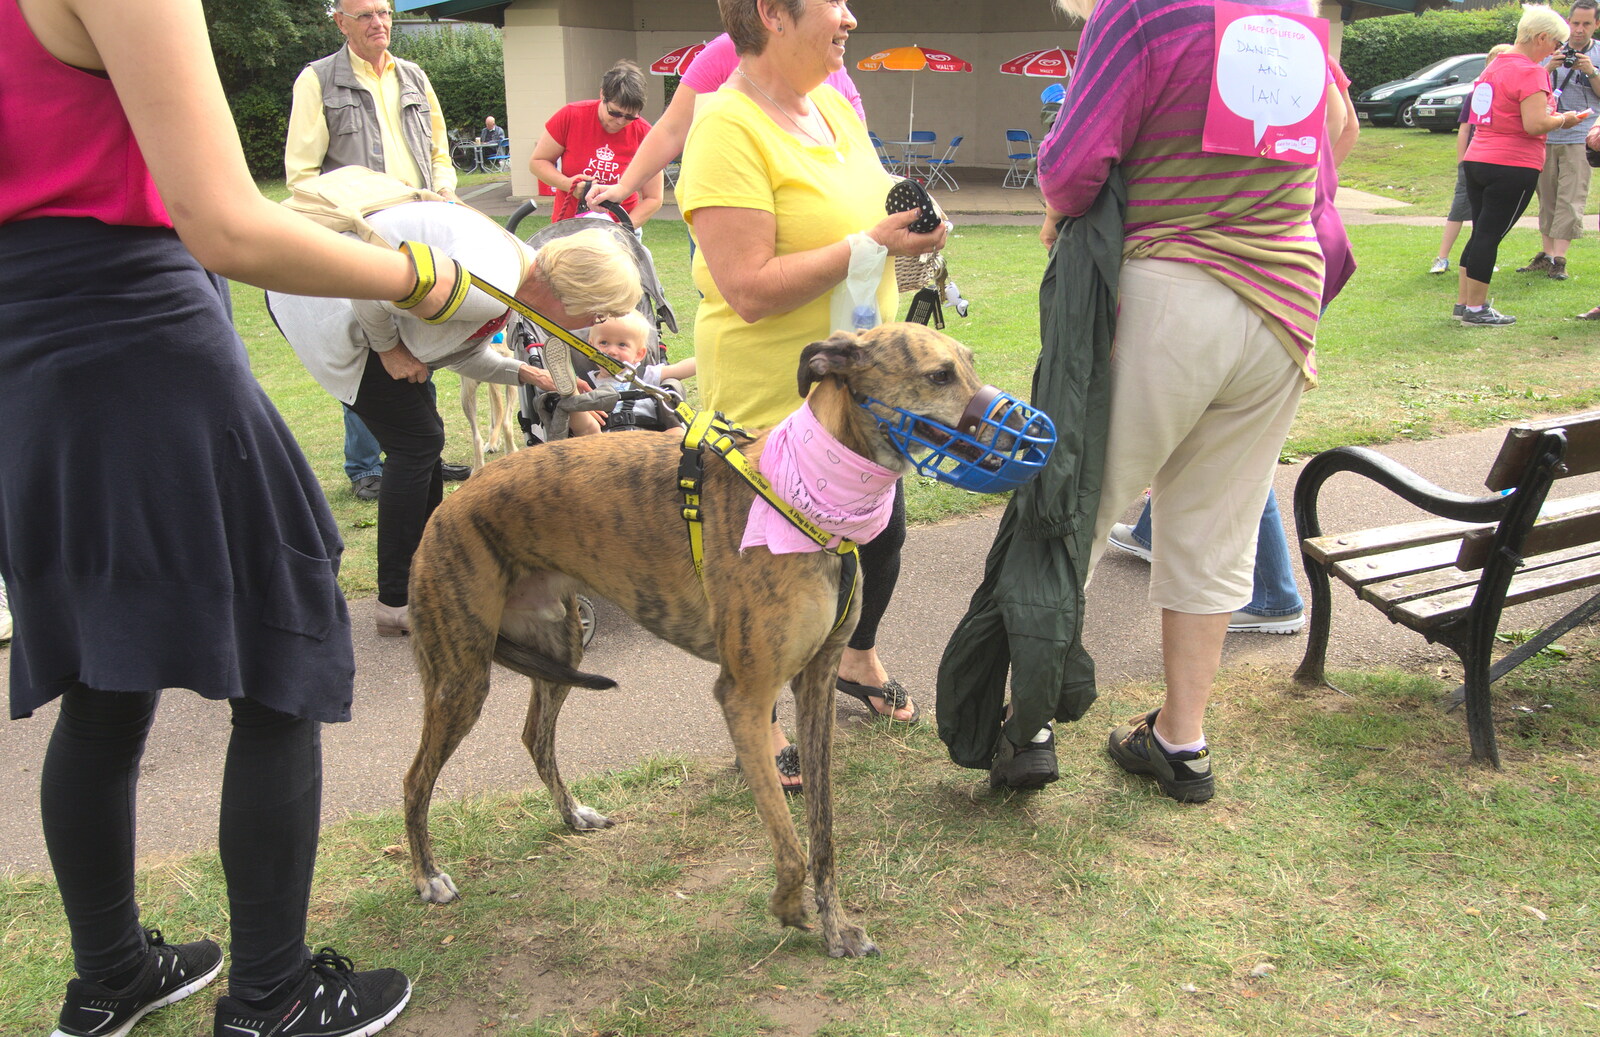 A racing greyhound from A Race For Life, The Park, Diss, Norfolk - 16th August 2015